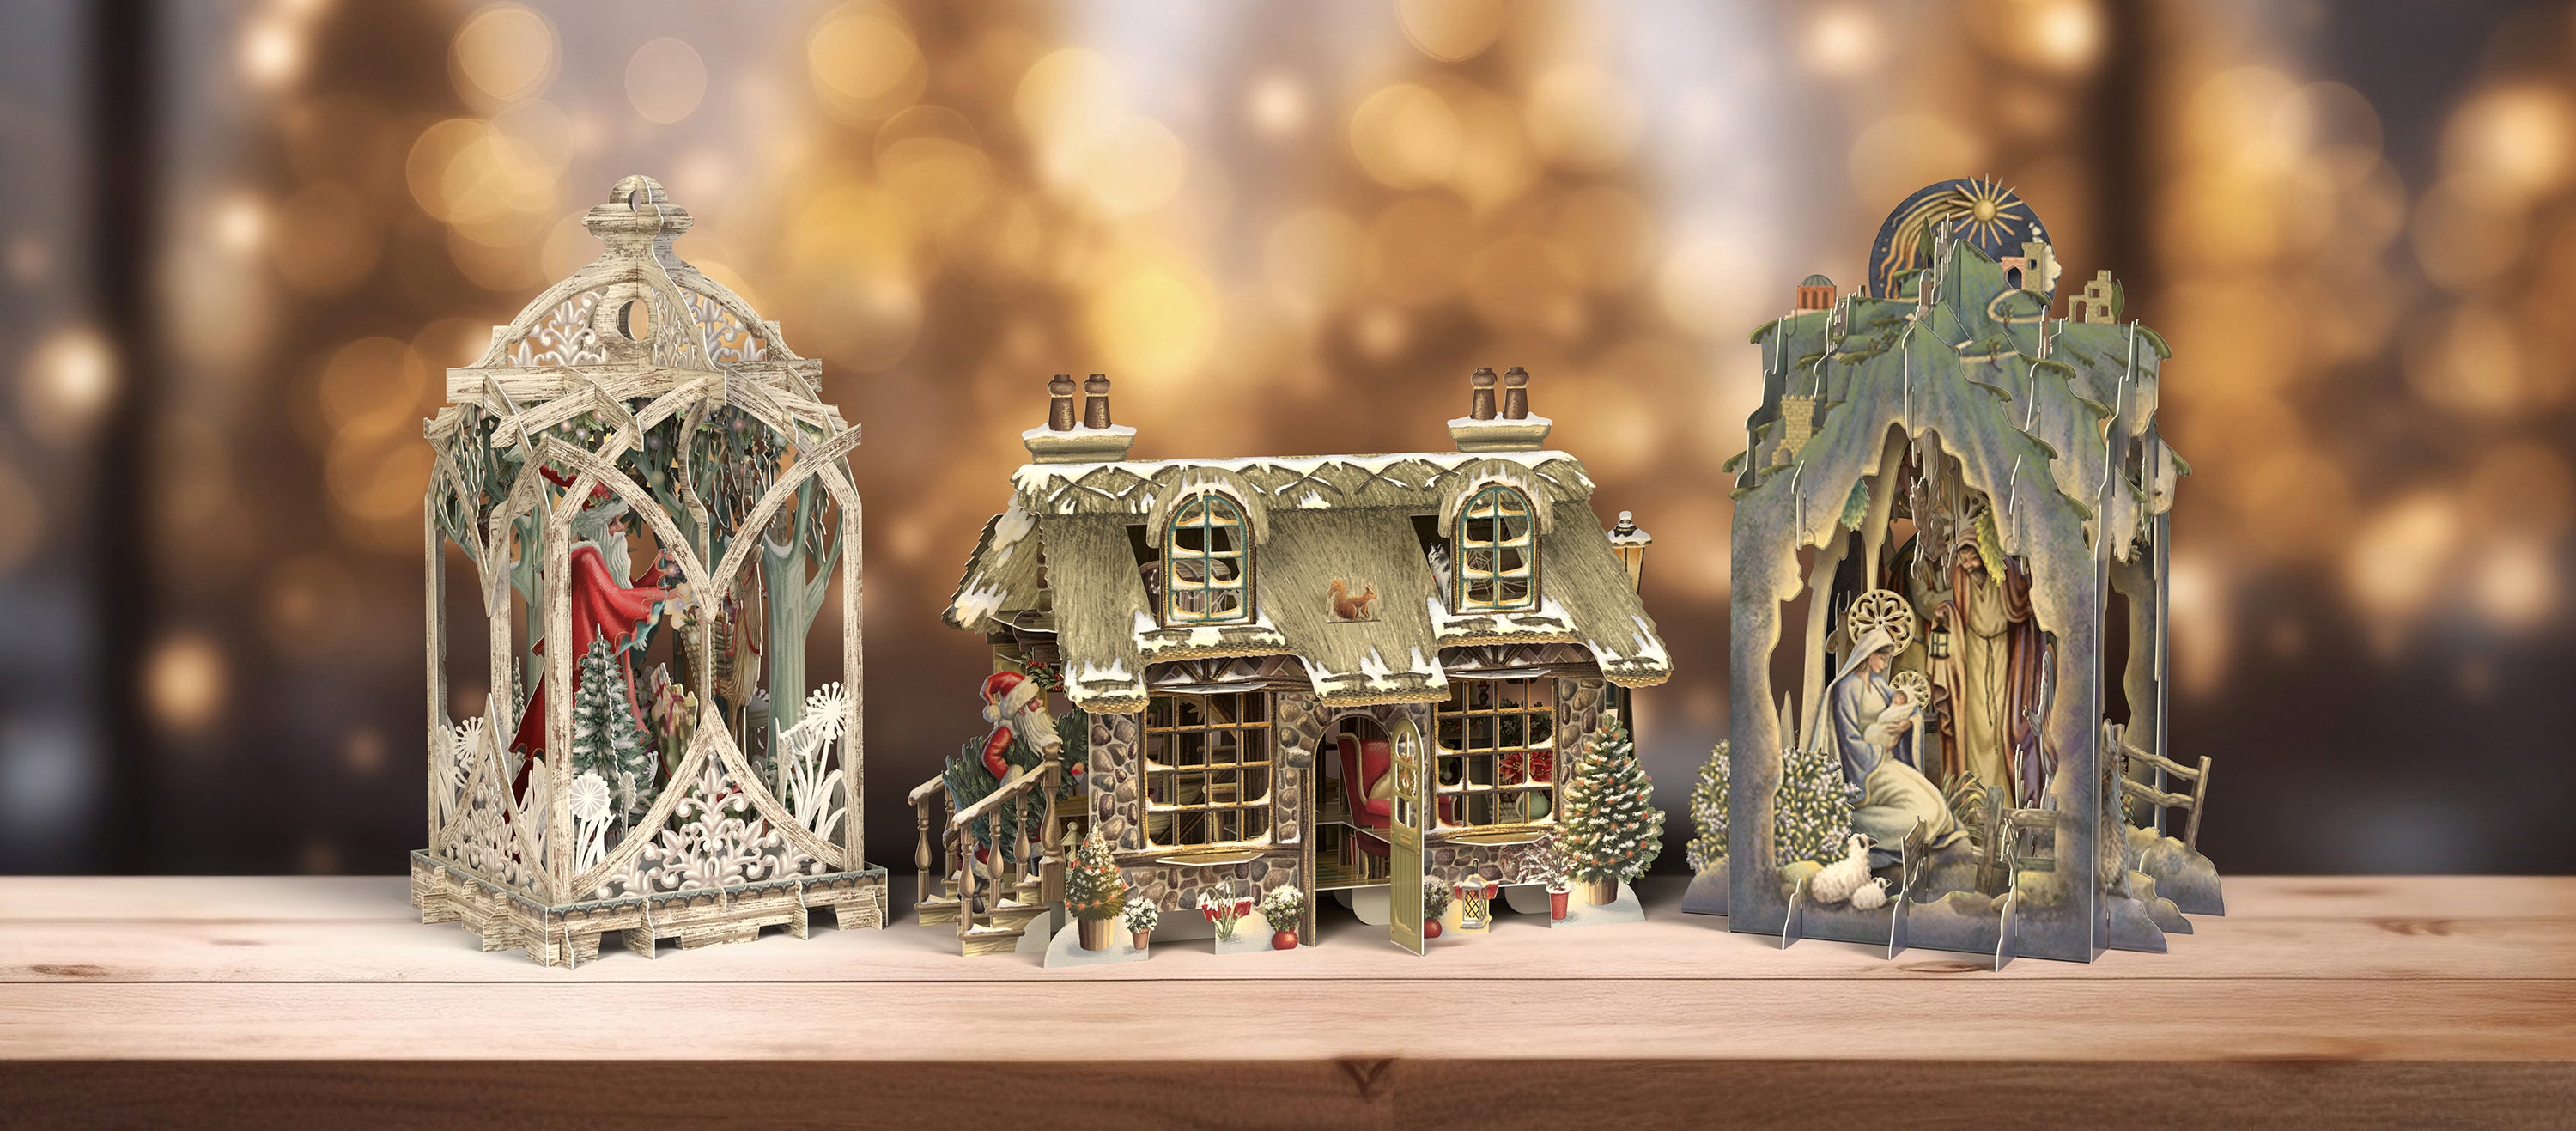 Stunning 3D Christmas Cards & Pop Up Christmas Cards from Me&McQ